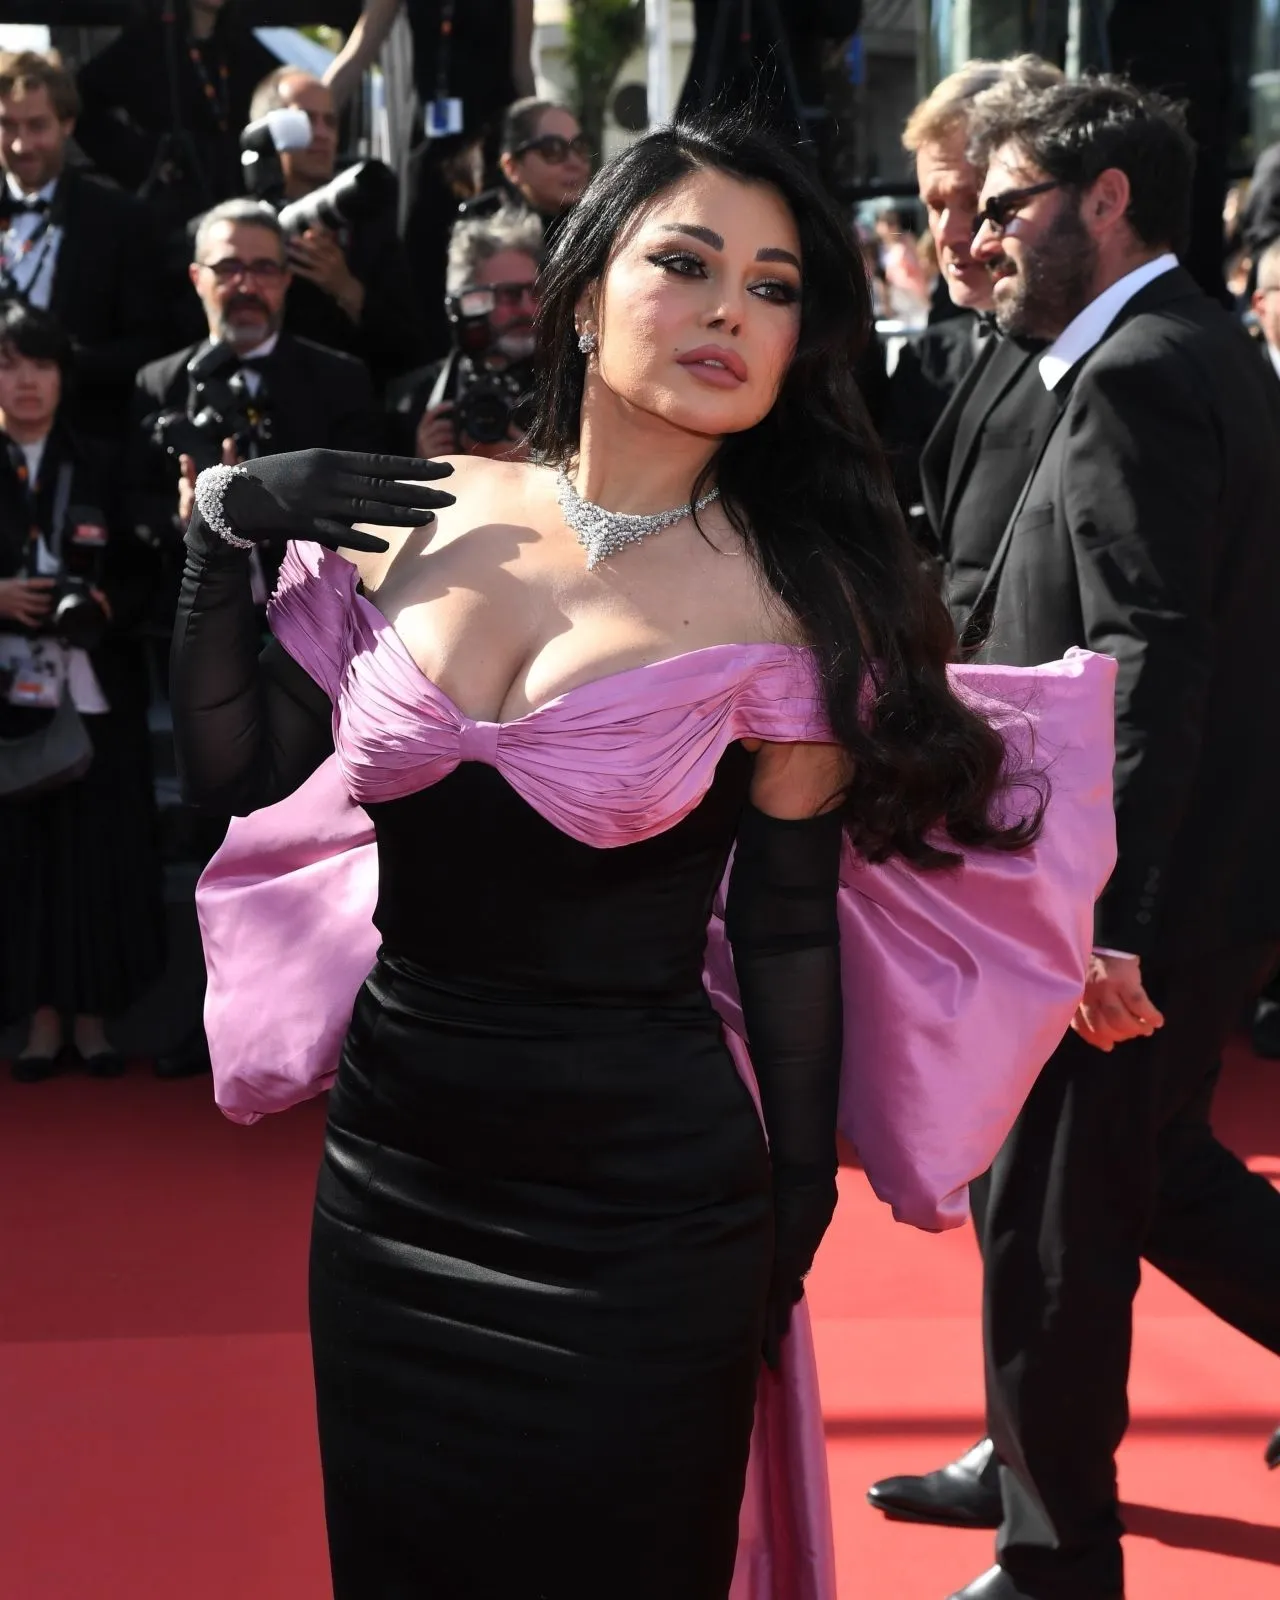 HAIFA WEHBE AT THE COUNT OF MONTE CRISTO PREMIERE AT CANNES FILM FESTIVAL6